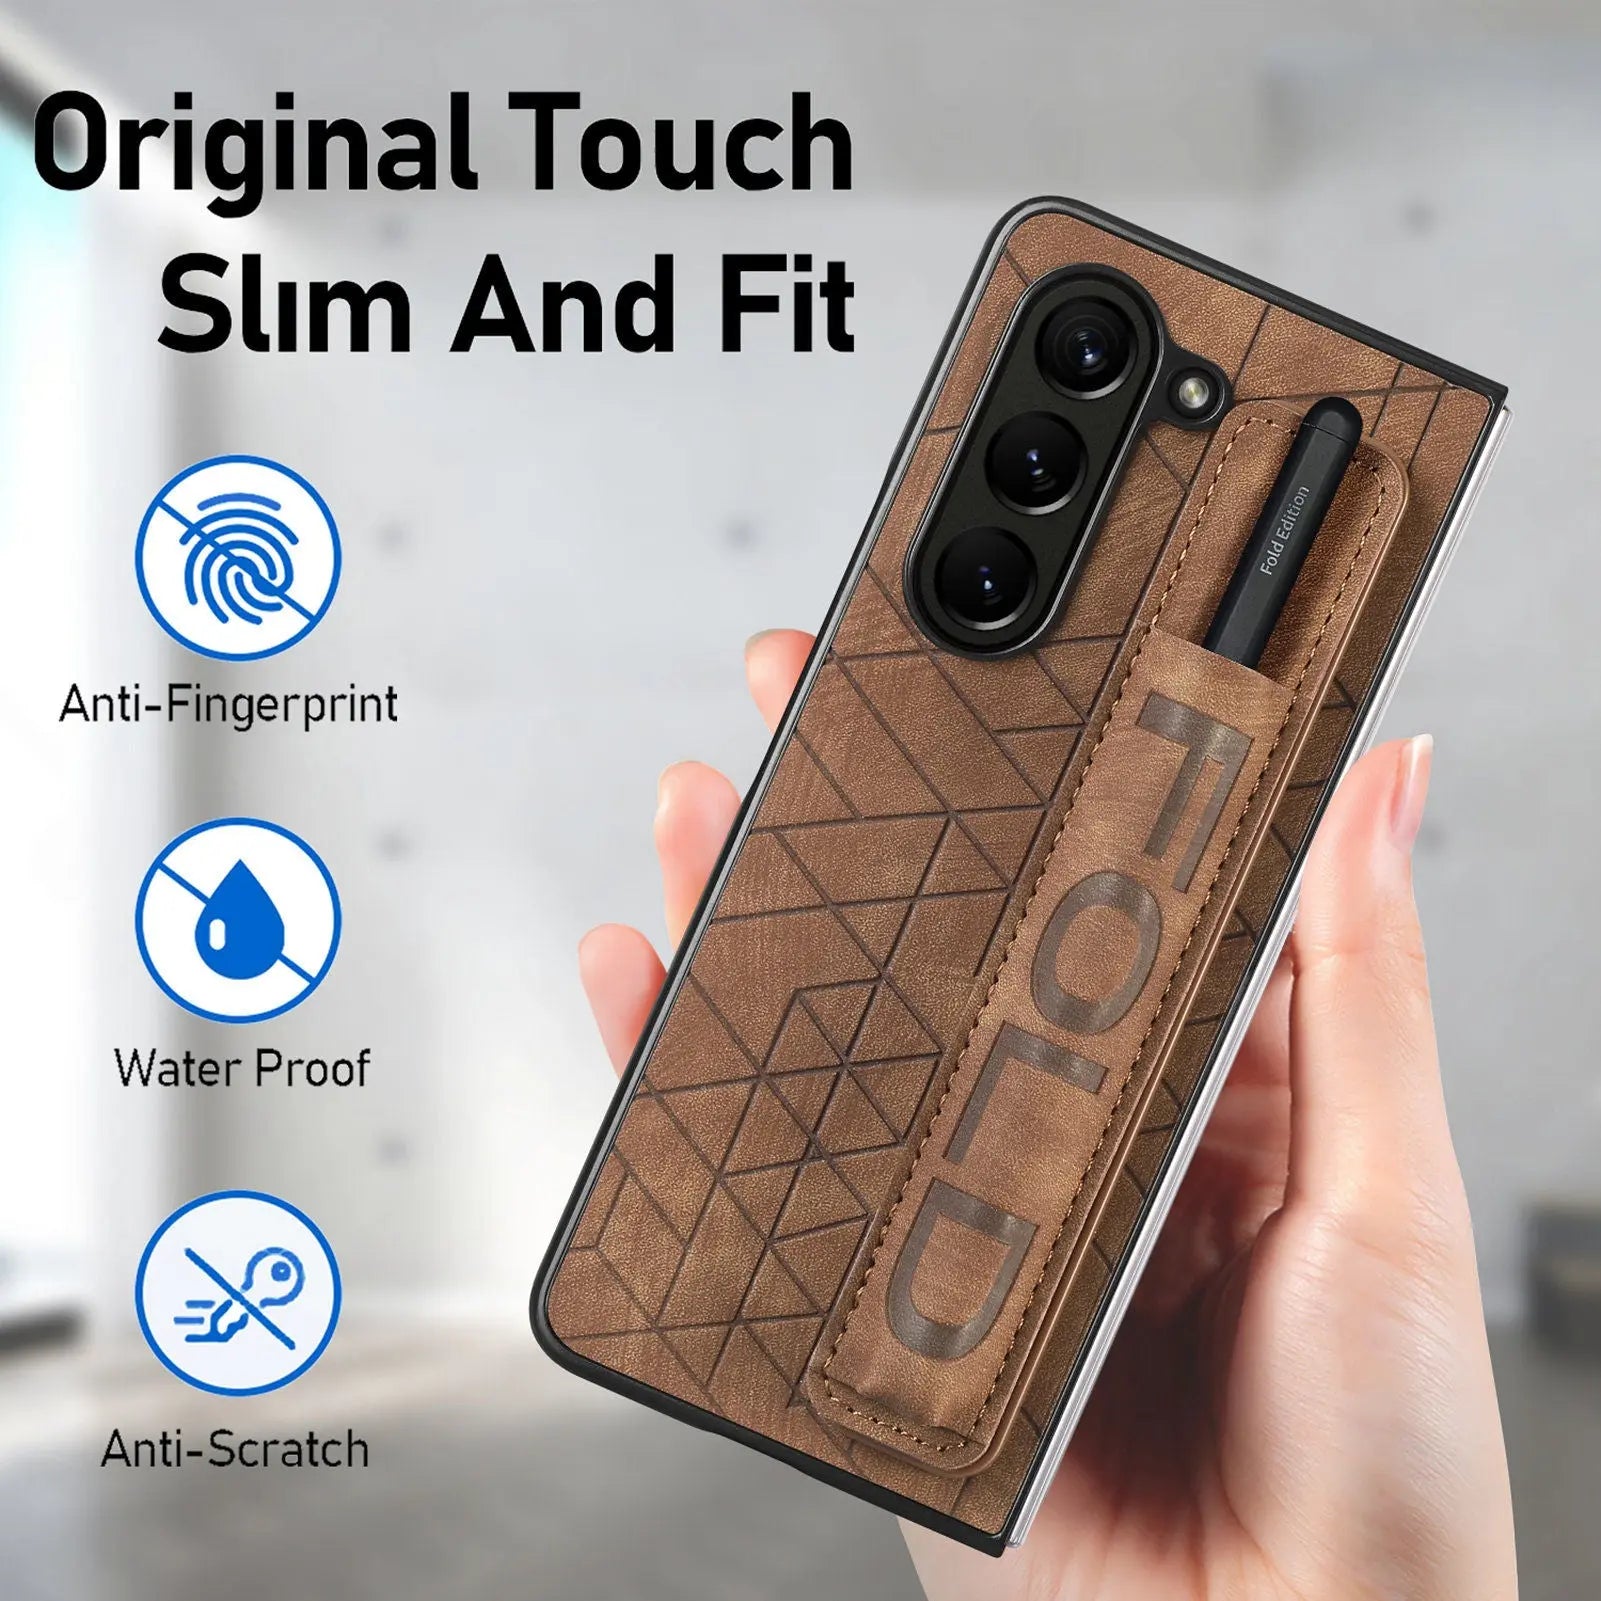 For Samsung Galaxy Z Fold 5 Fashion Case with Wristband Ring Design & Pen Holder Lightweight Slim and Fit Anti-fall Cover Pinnacle Luxuries